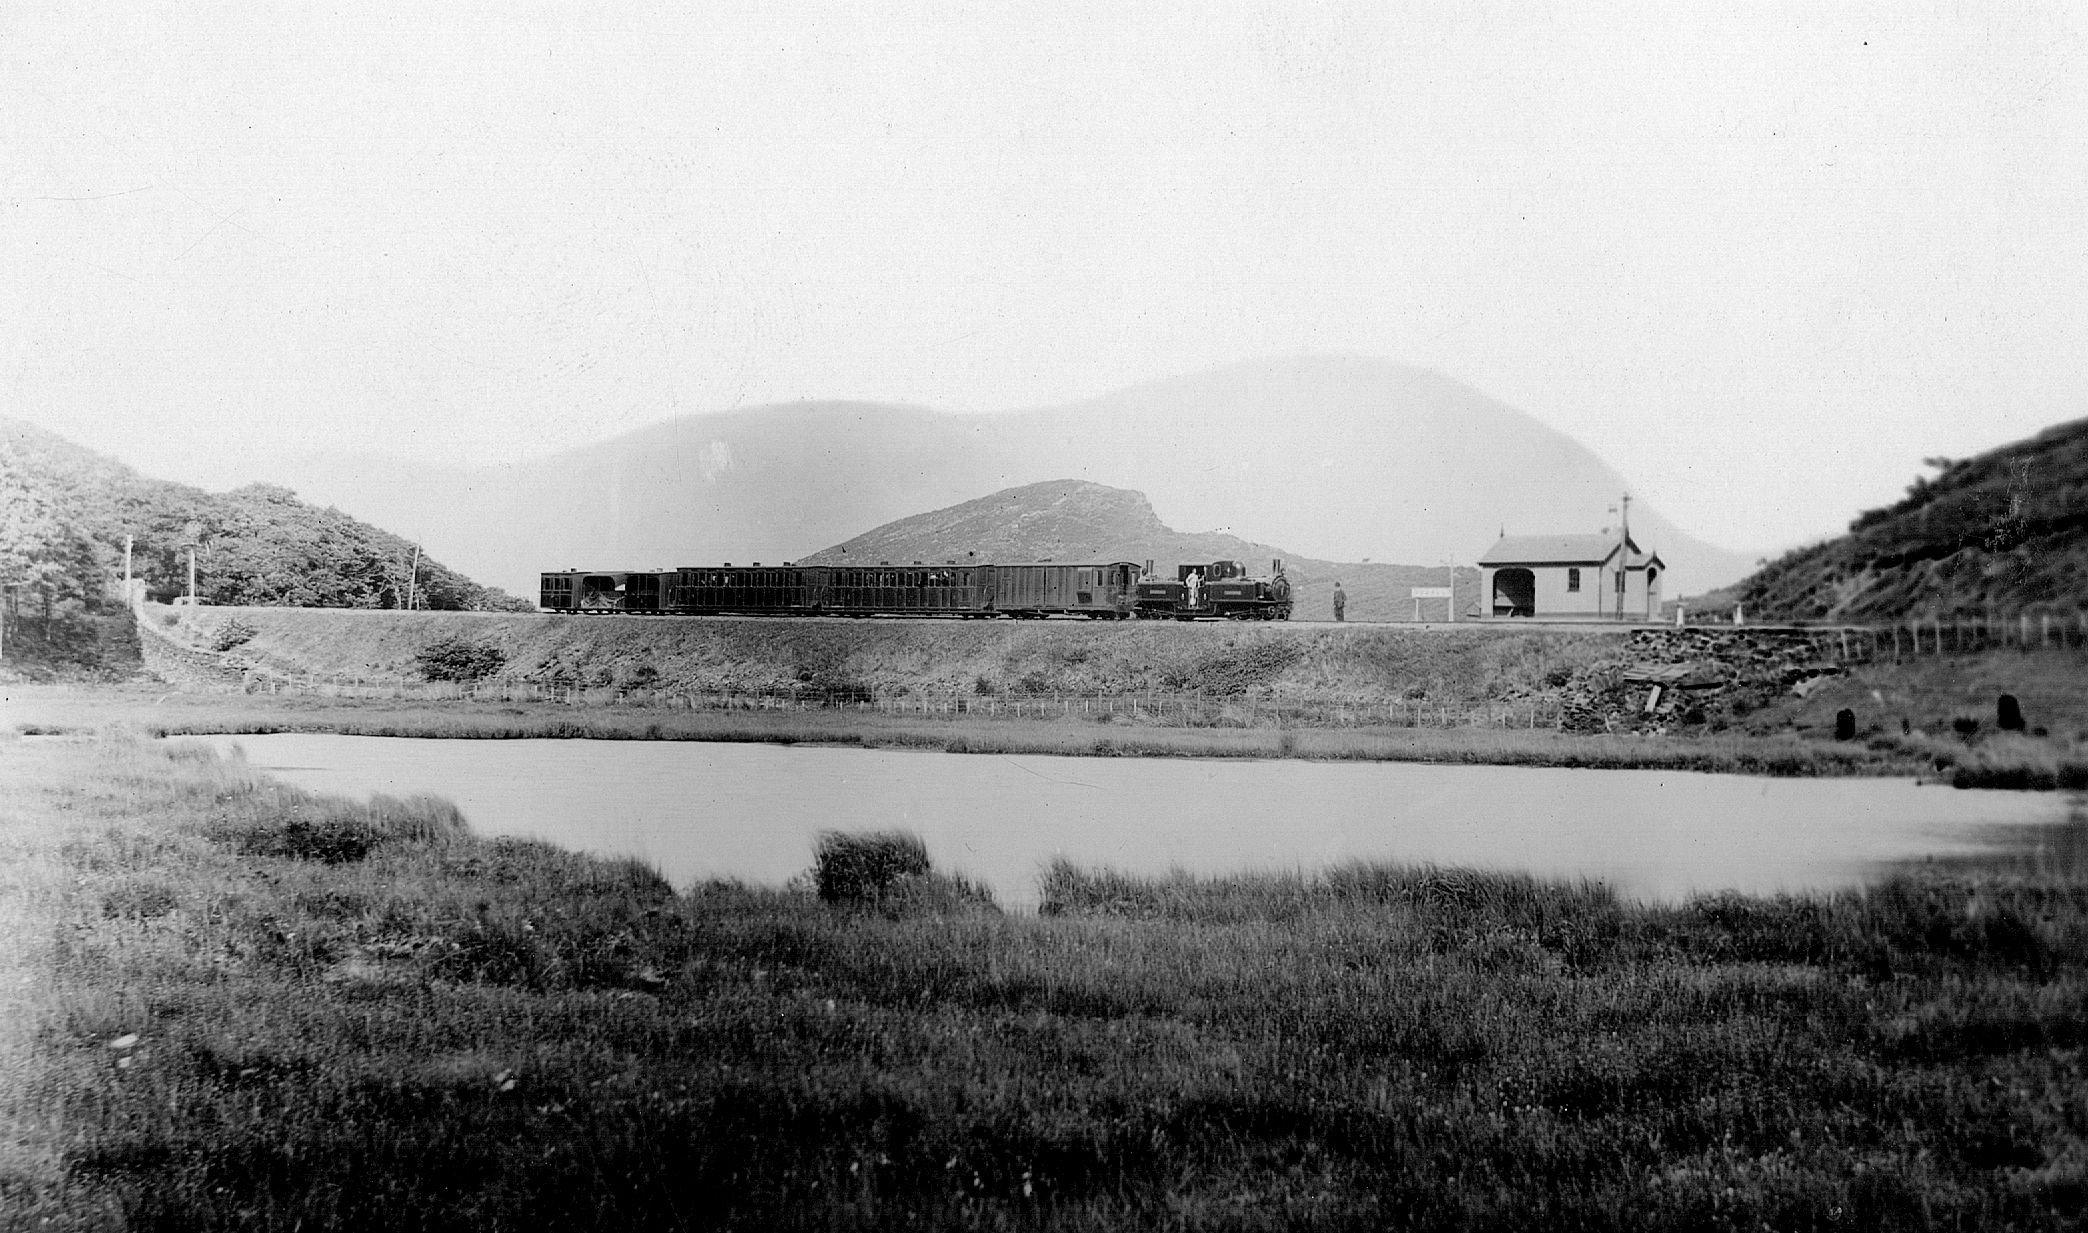 NGRS Collection 3 Ffestiniog Railway Double Fairlie loco with passenger train in distance passing lake.jpg